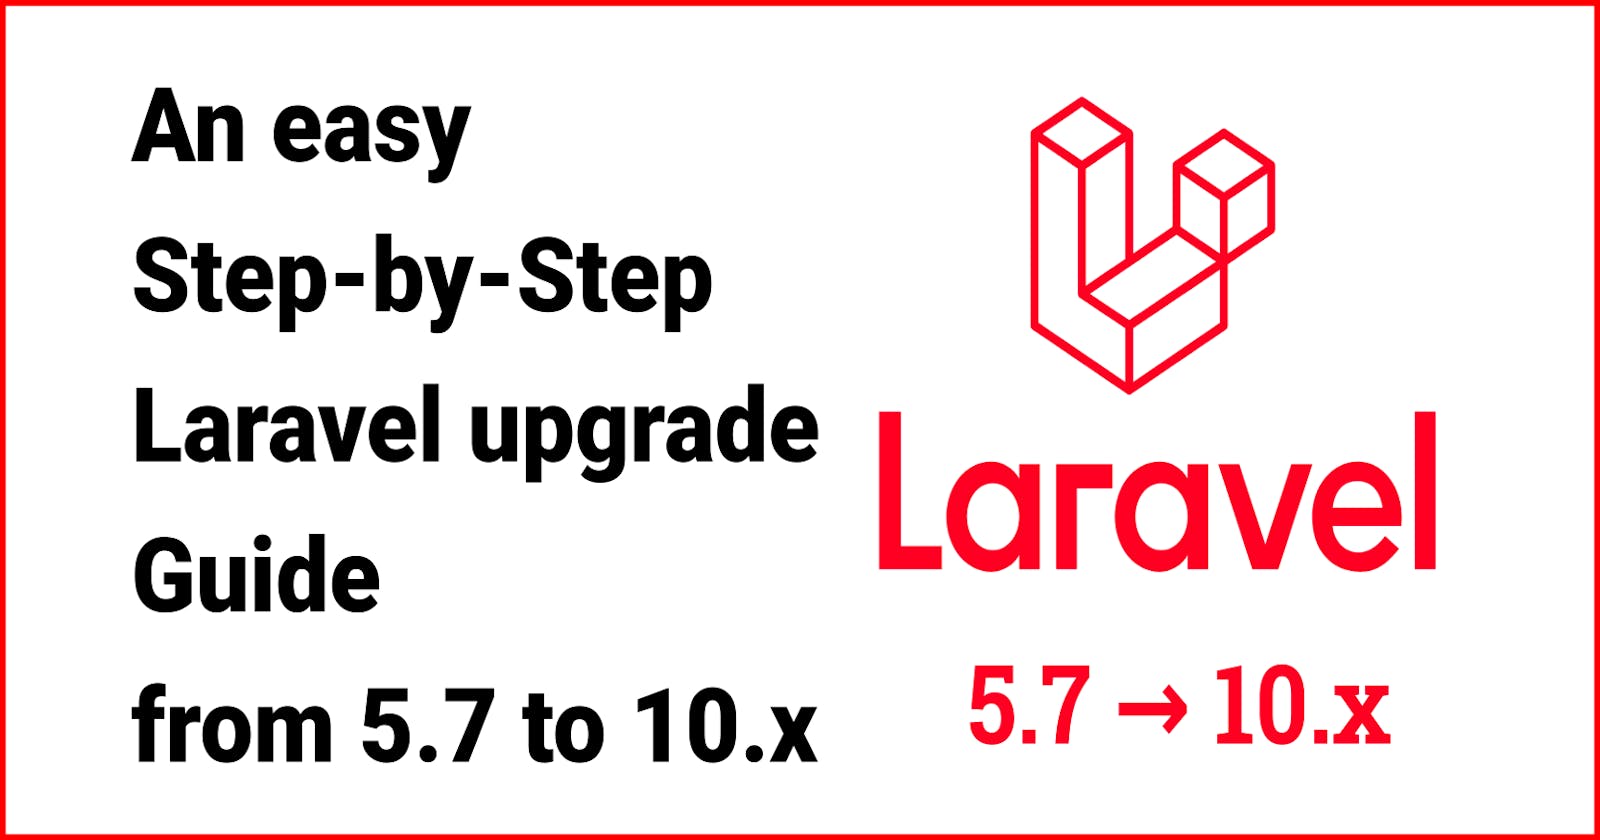 Upgrading Laravel: An easy Step-by-Step Guide from 5.7 to 10.x